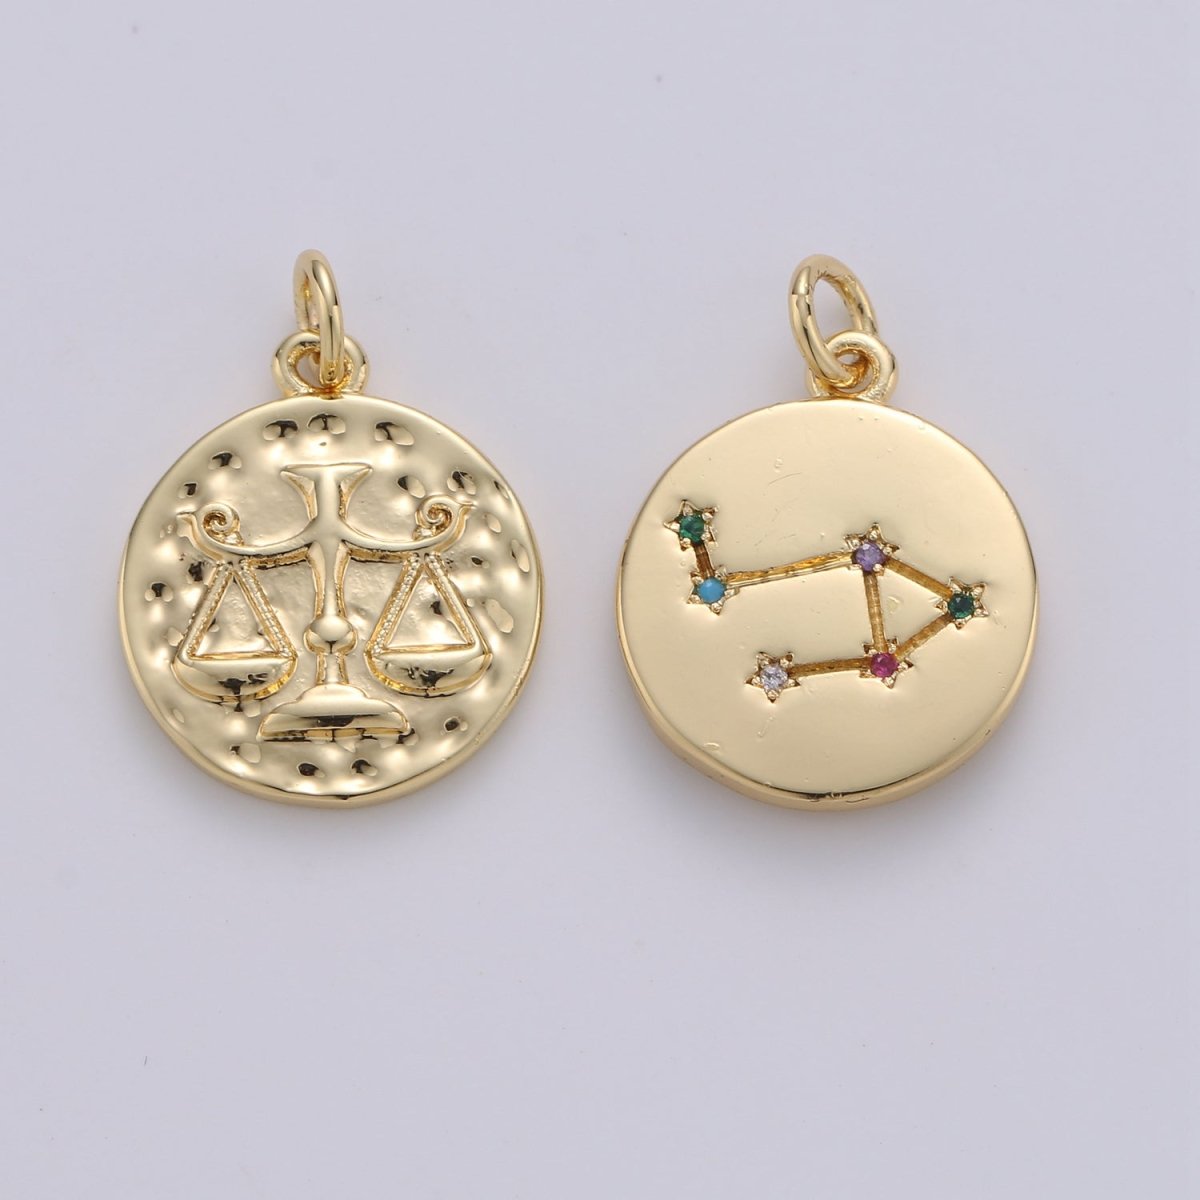 14K Gold Filled Zodiac Constellation Charms, Zodiac Symbol, Horoscope Charm, Gold Astrological Zodiac Signs, Double Sided Charm Pendant | A-326-A-337 - DLUXCA